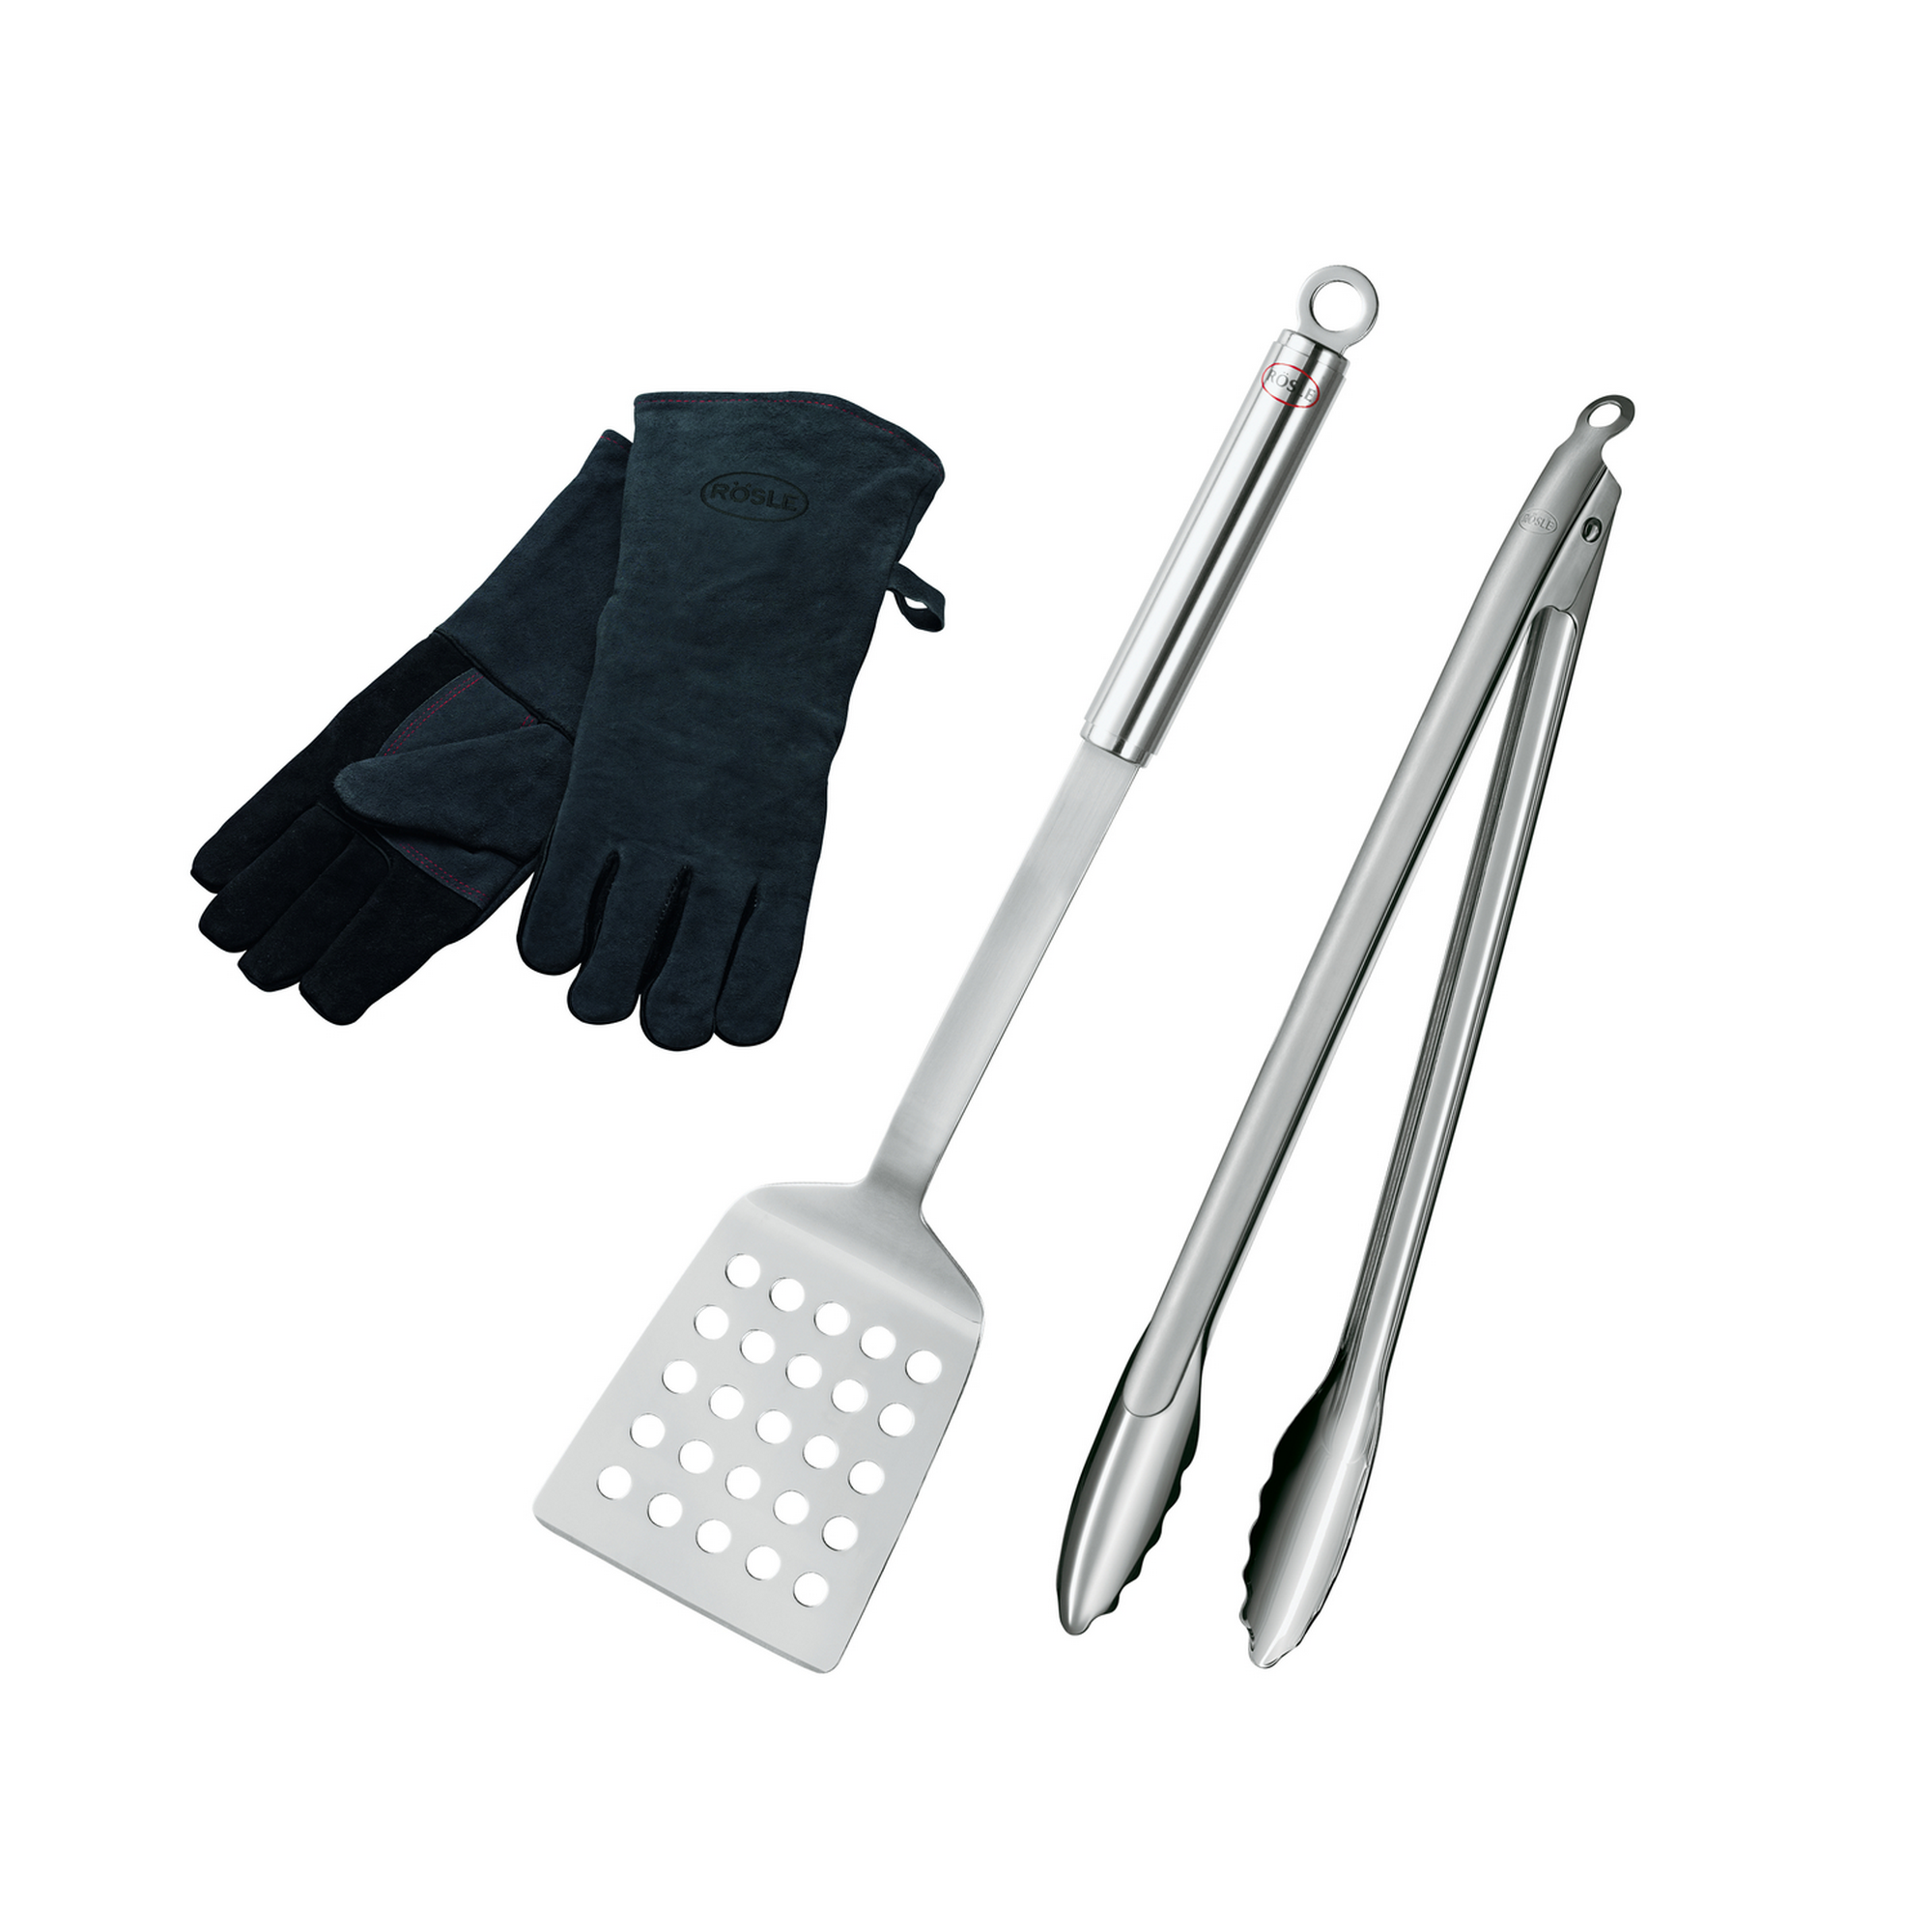 Barbecue Starter-Set 3-teilig + product picture